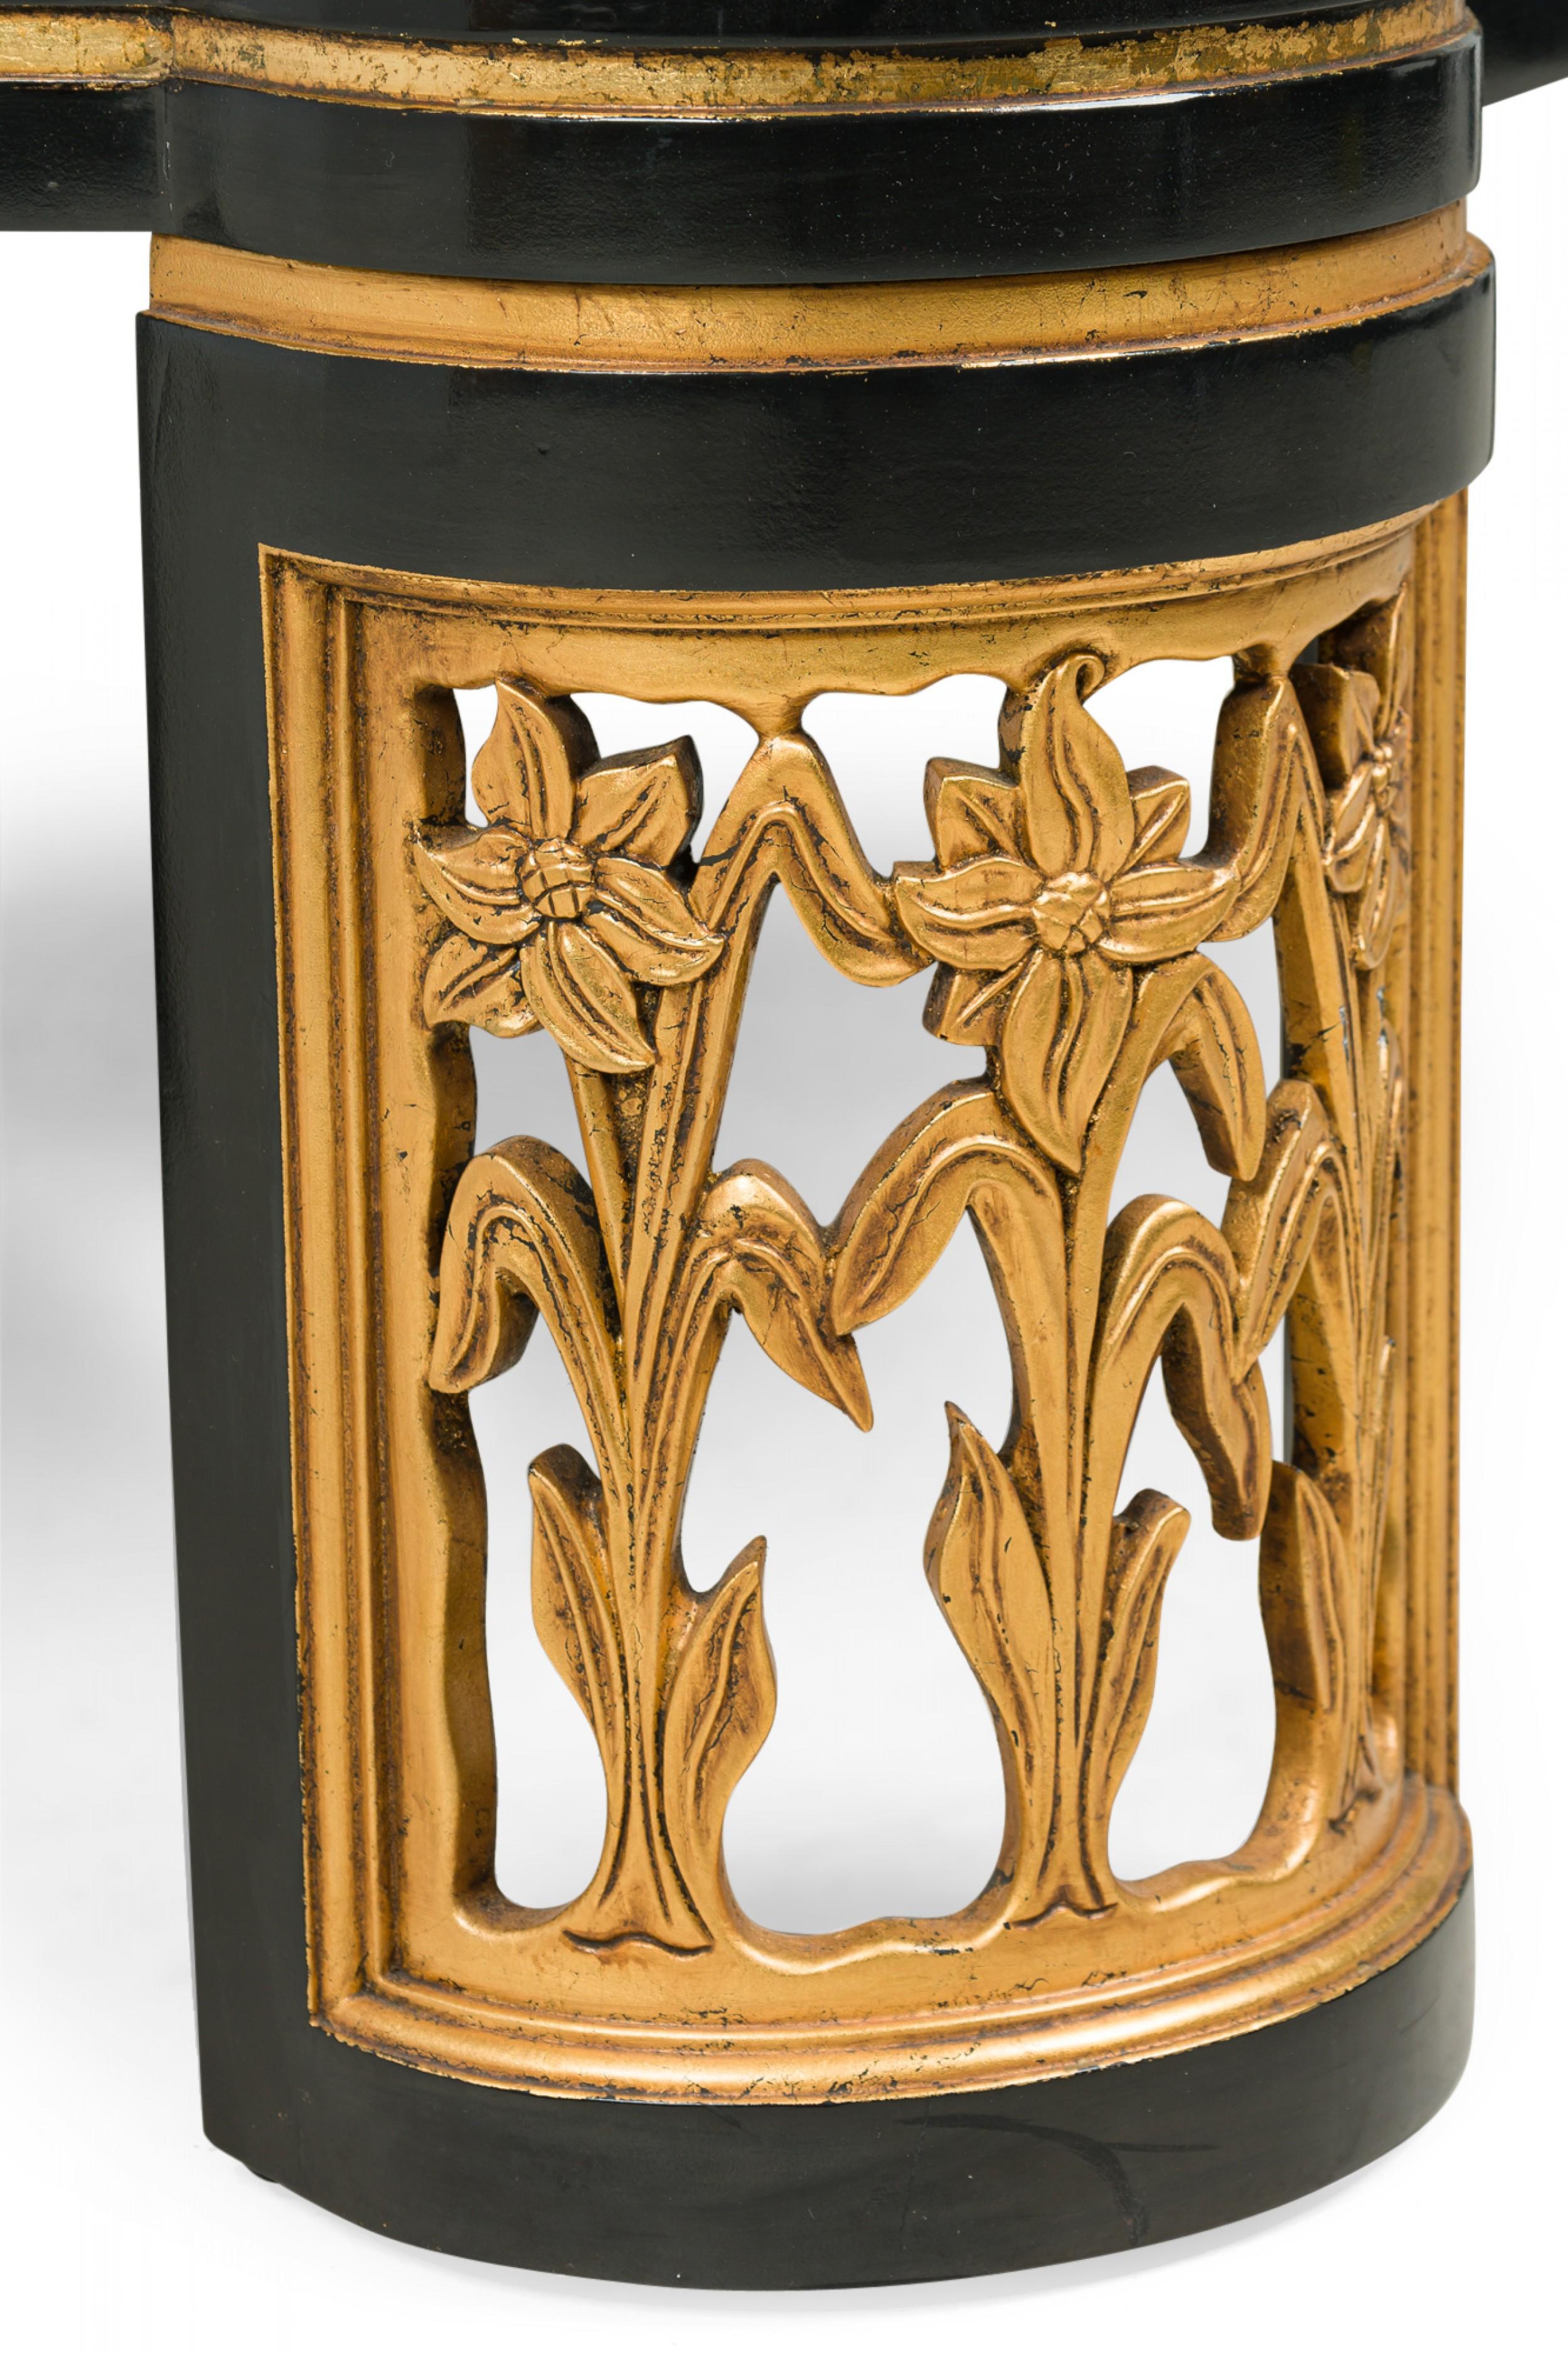 American Mid-Century low / coffee table features a black lacquered top with rounded out corners and incised parcel gilt trim, connected to four demilune legs with reticulated floral carvings. (attributed to JAMES MONT)
 

 Wear to finish on the